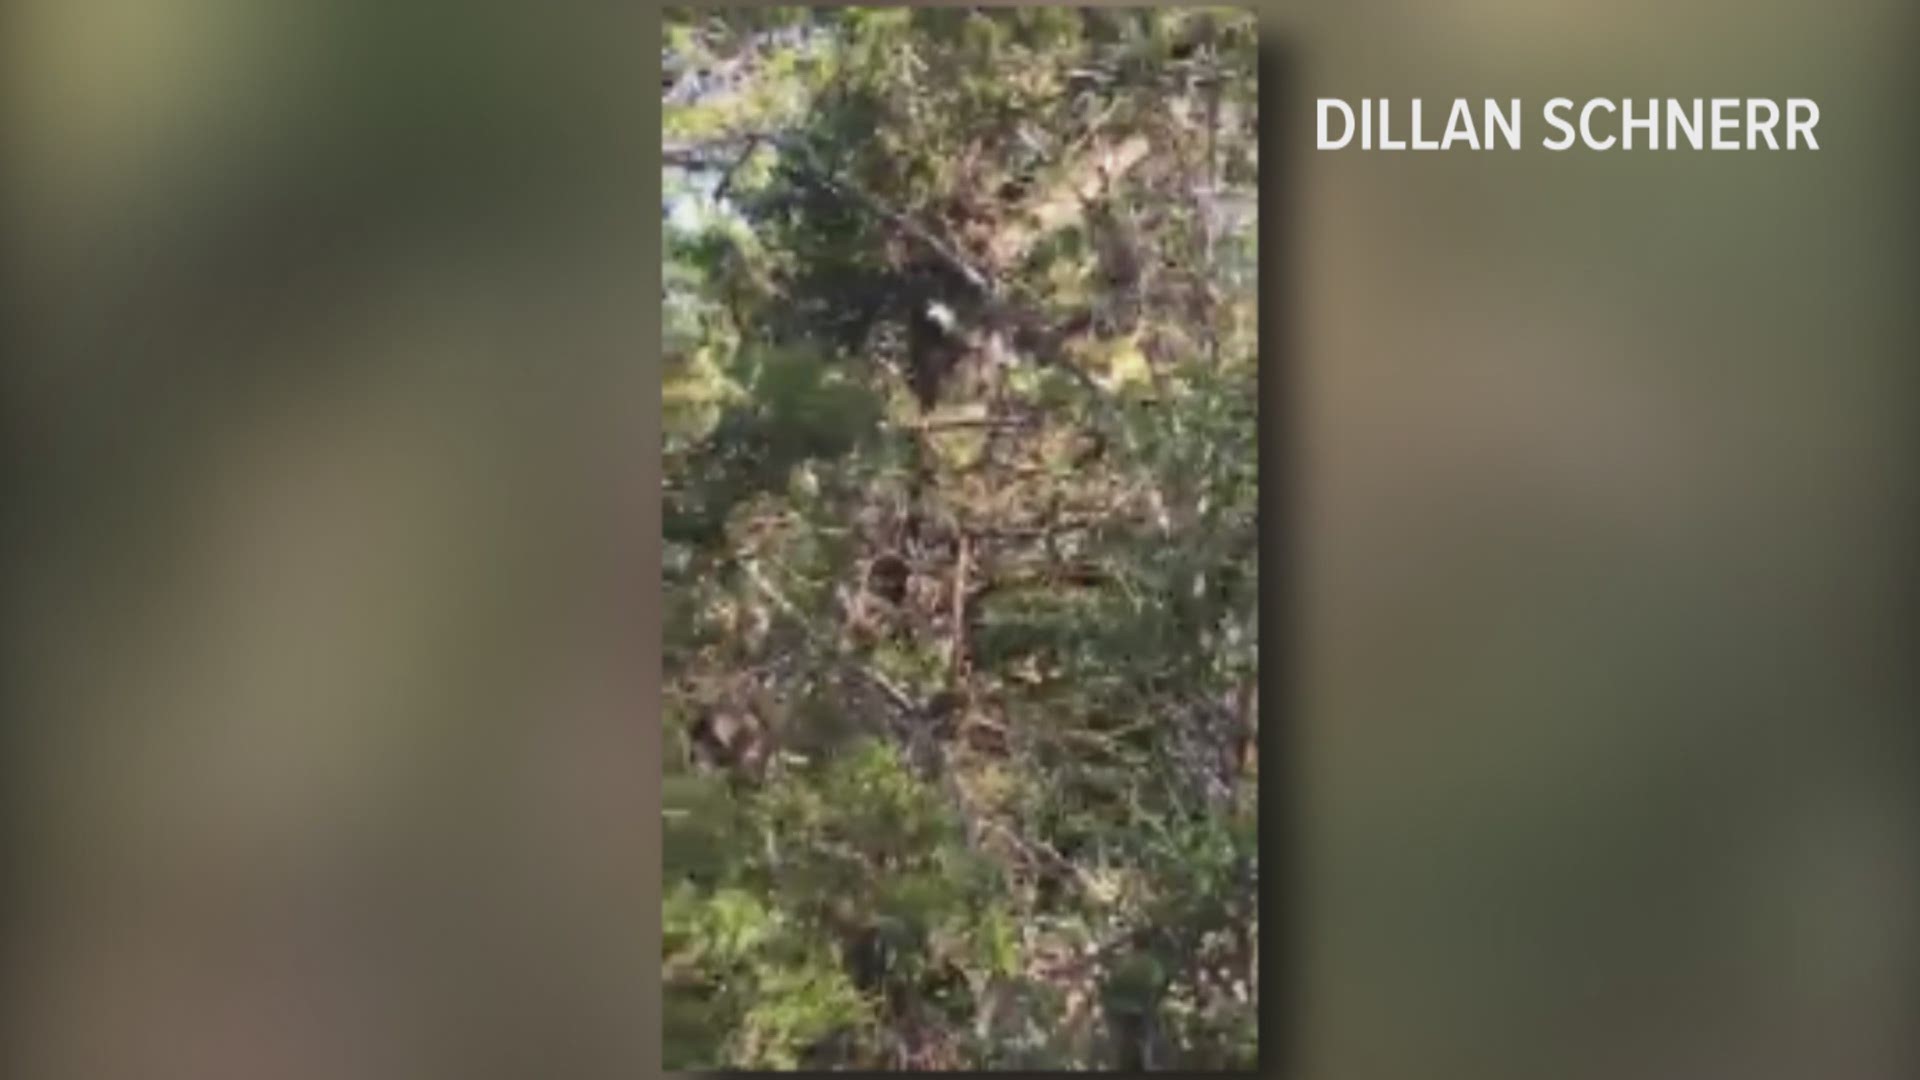 Dillan Schnerr was headed to his bow stand on his family's ranch in Fredericksburg when he said he saw a snake lying on a tree limb.